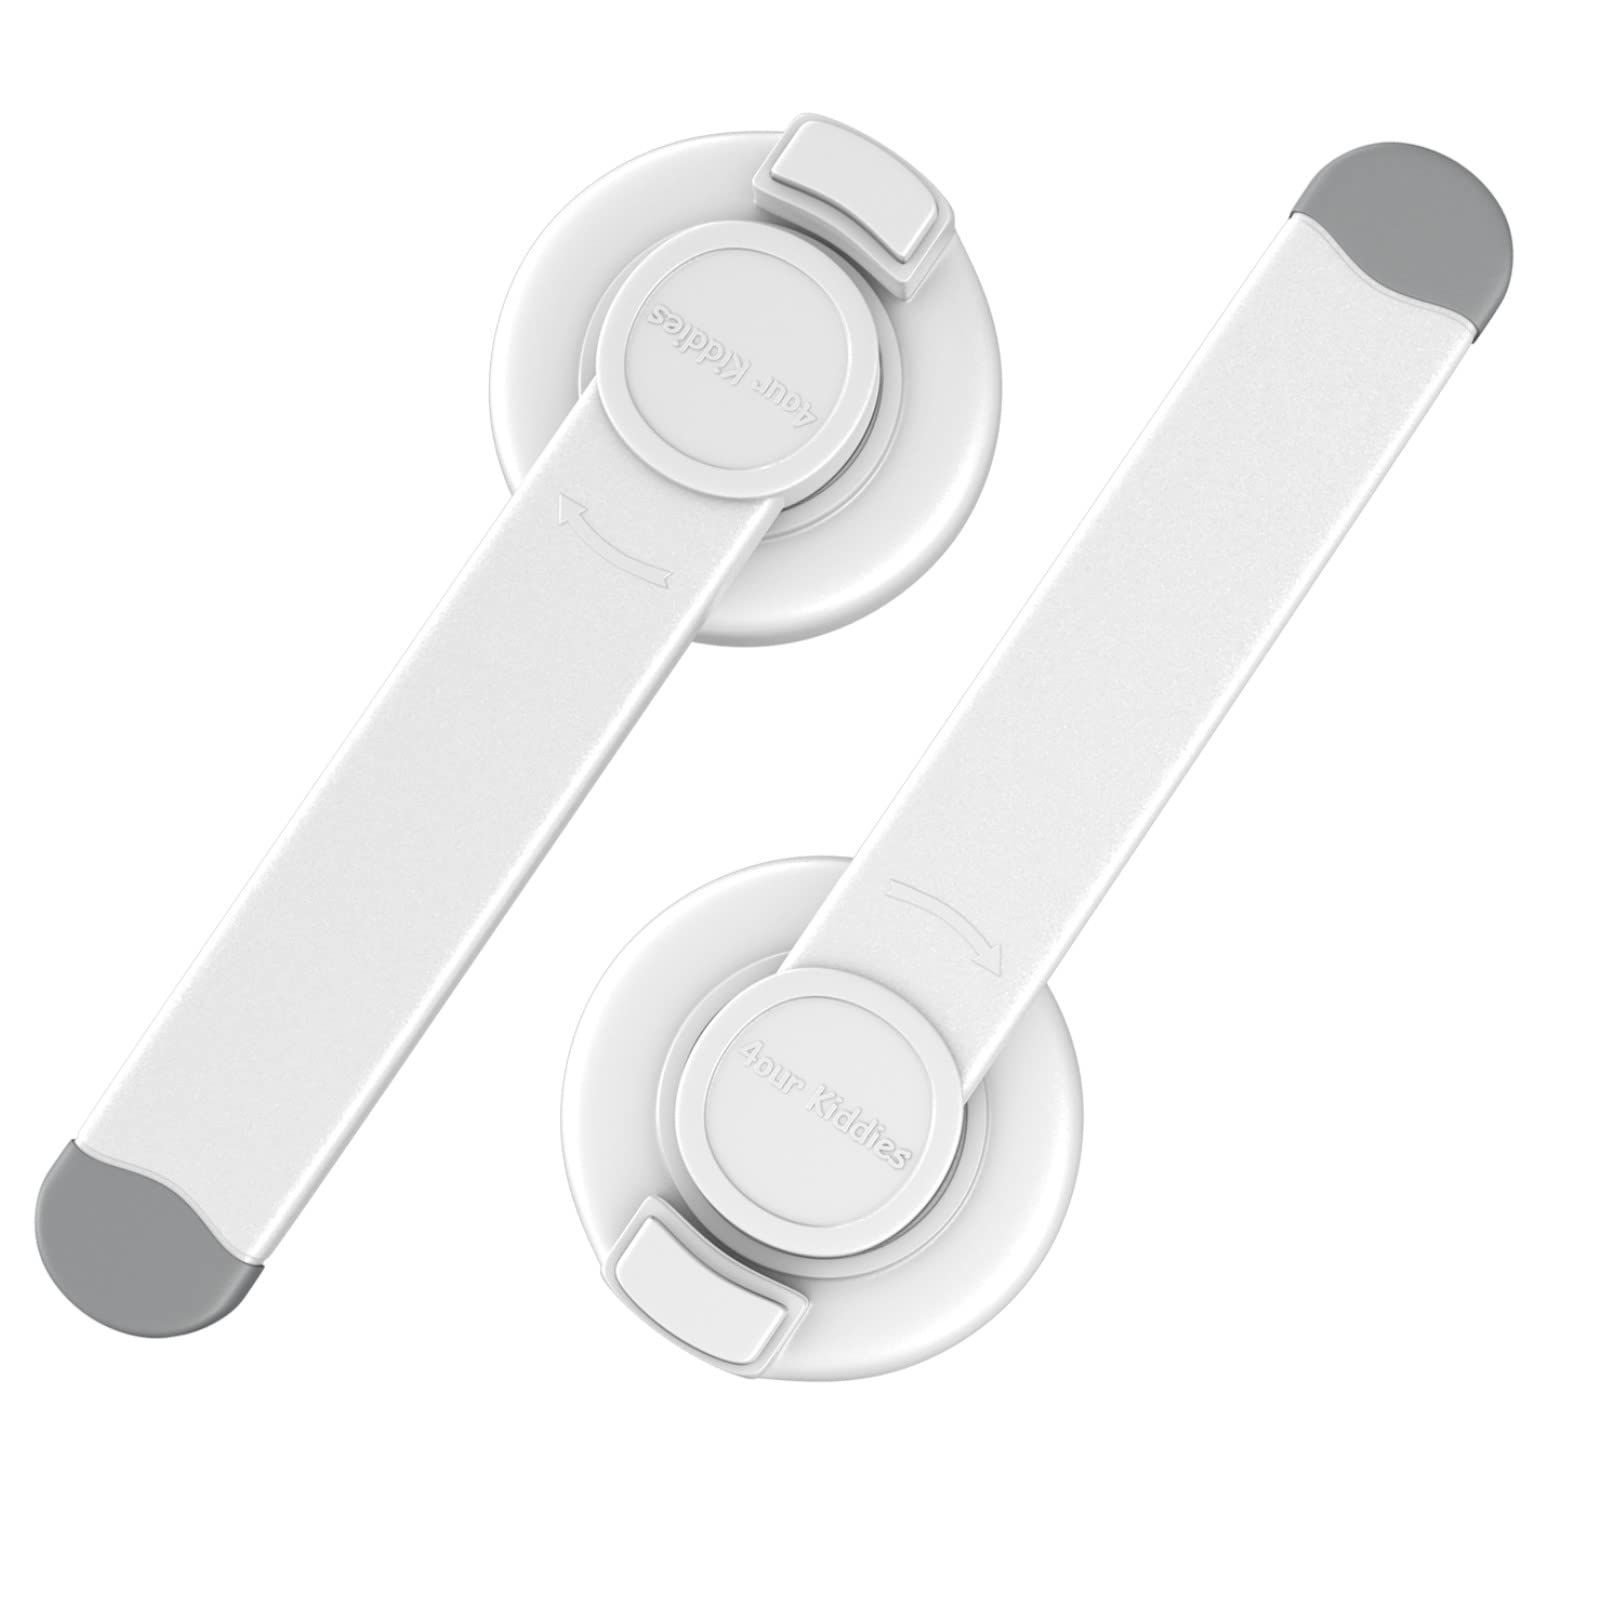 4our Kiddies Baby Toilet Lock (2 Pack) for Child Safety, Baby Proof Toilet Seat Lock with 2 Extra Pallet Fit for Most Standard Toilet, Easy Intallation Toilet Lid Lock with 2 Extra 3M Adhesive | Amazon (US)